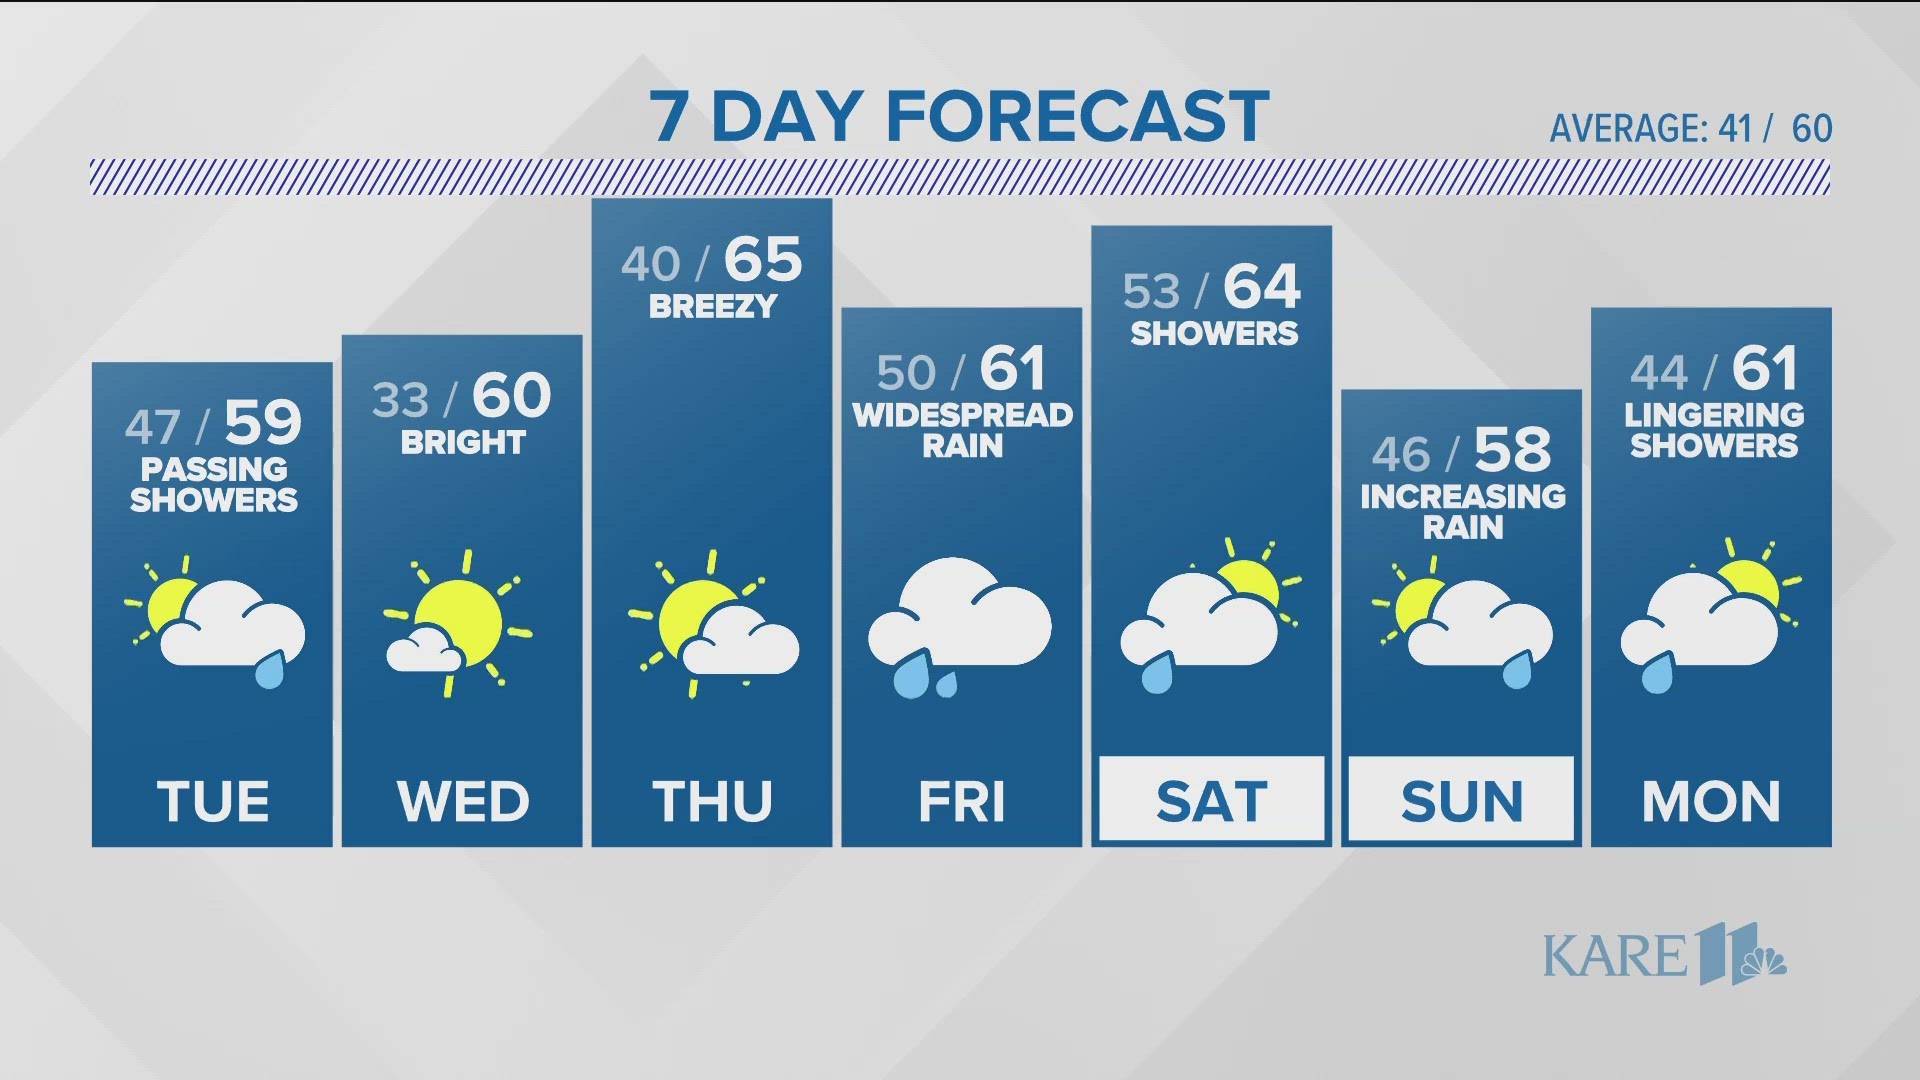 Another round of showers and wind for Tuesday, but widespread rain lands on Friday.